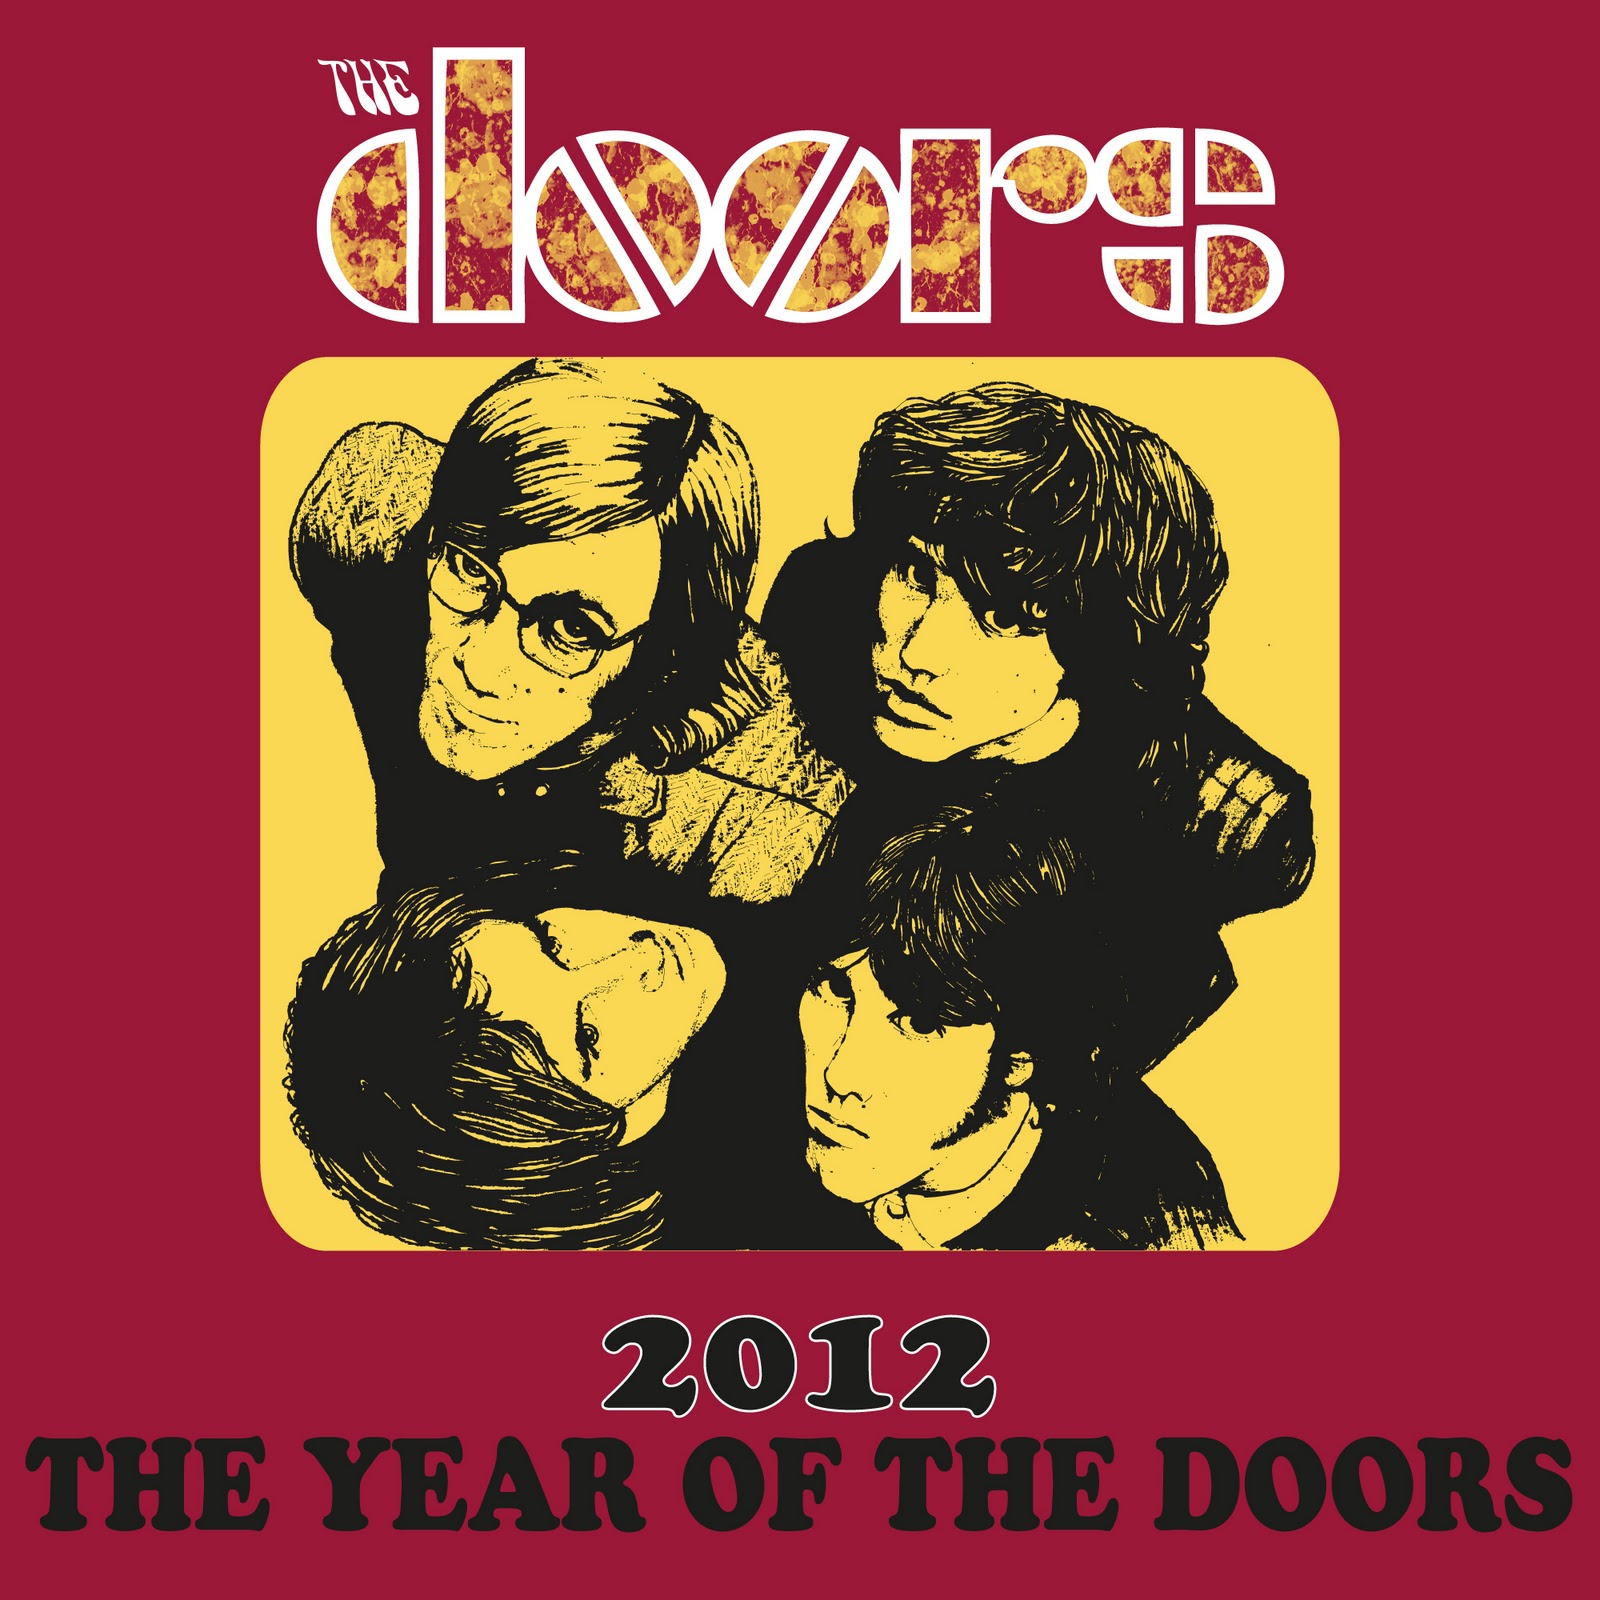 MINE: Graphic's for a logo for the year of the door's